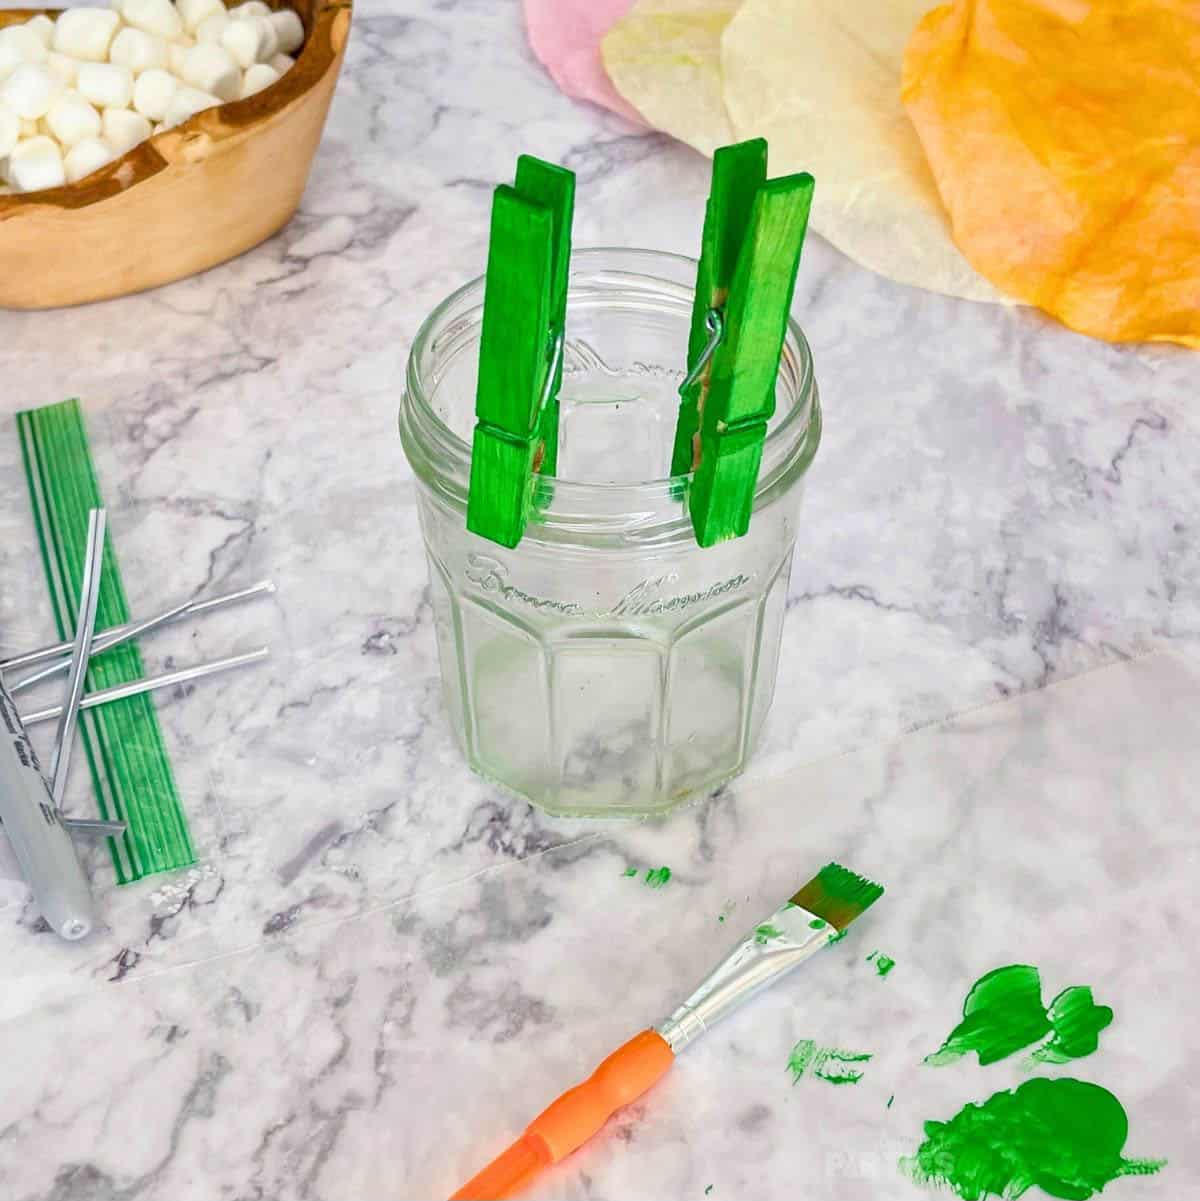 Green painted clothespins are clipped to a glass jar to dry.